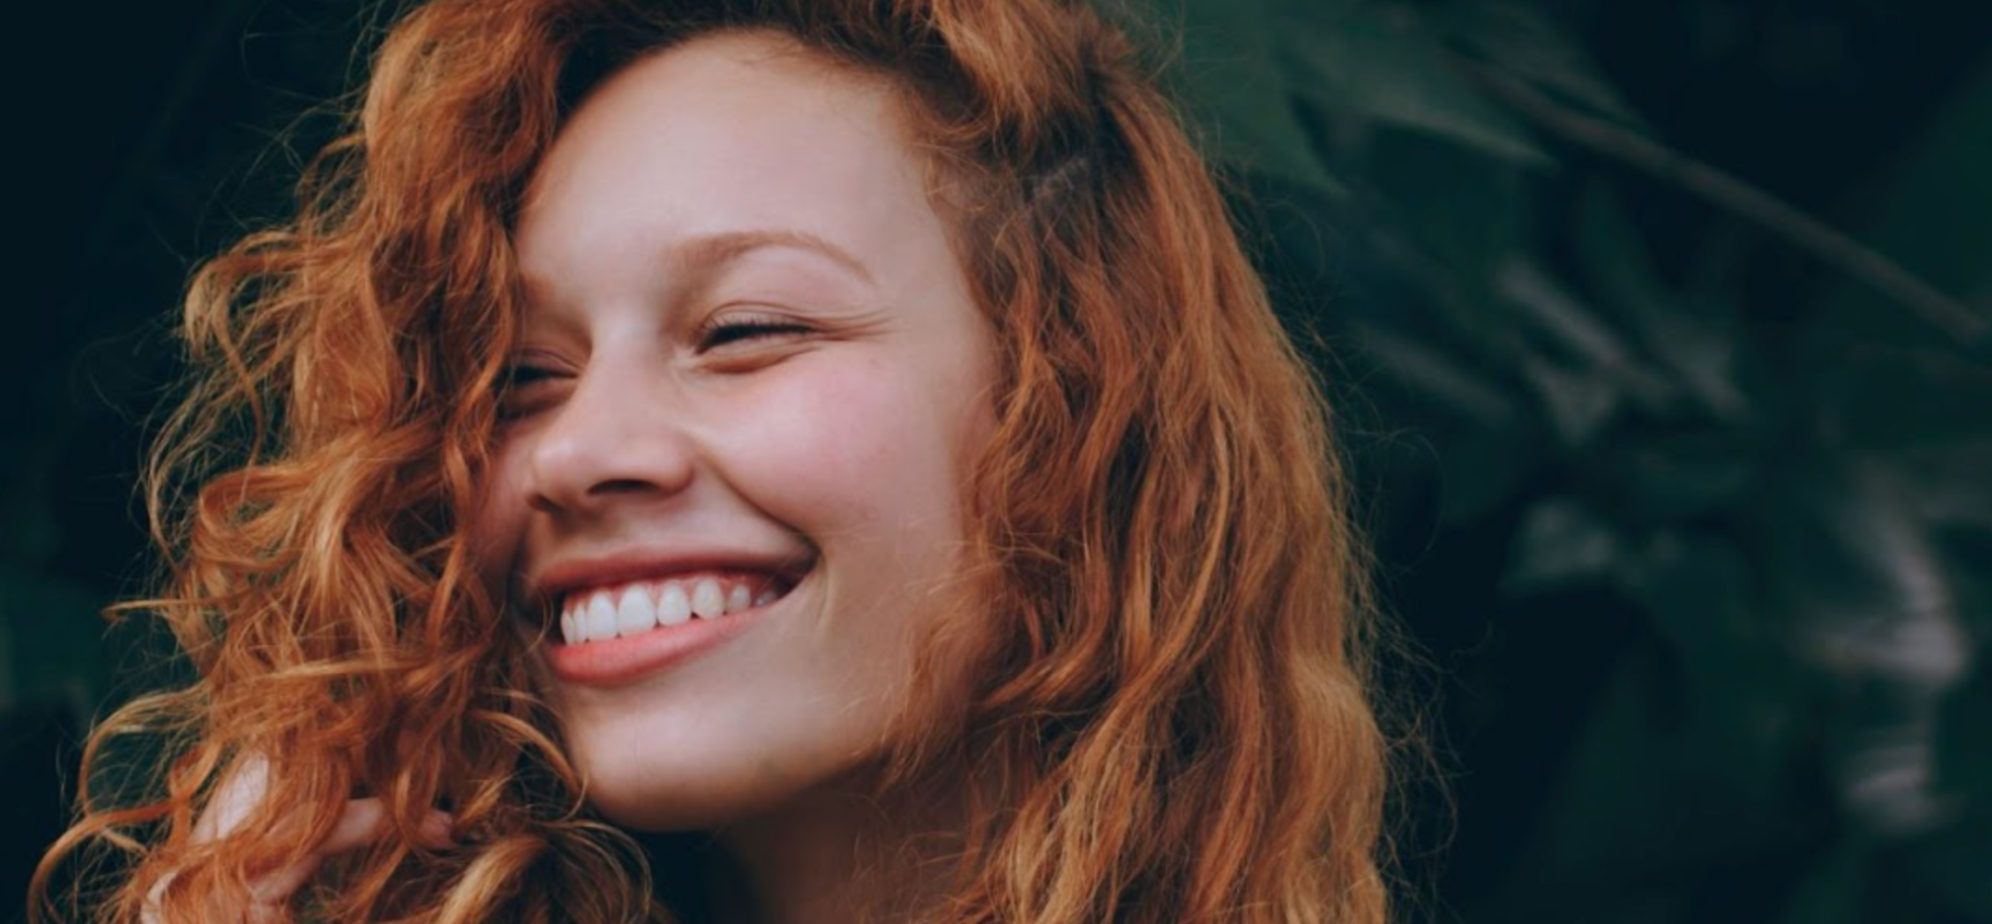 Woman laughing and smiling with long, curly red hair